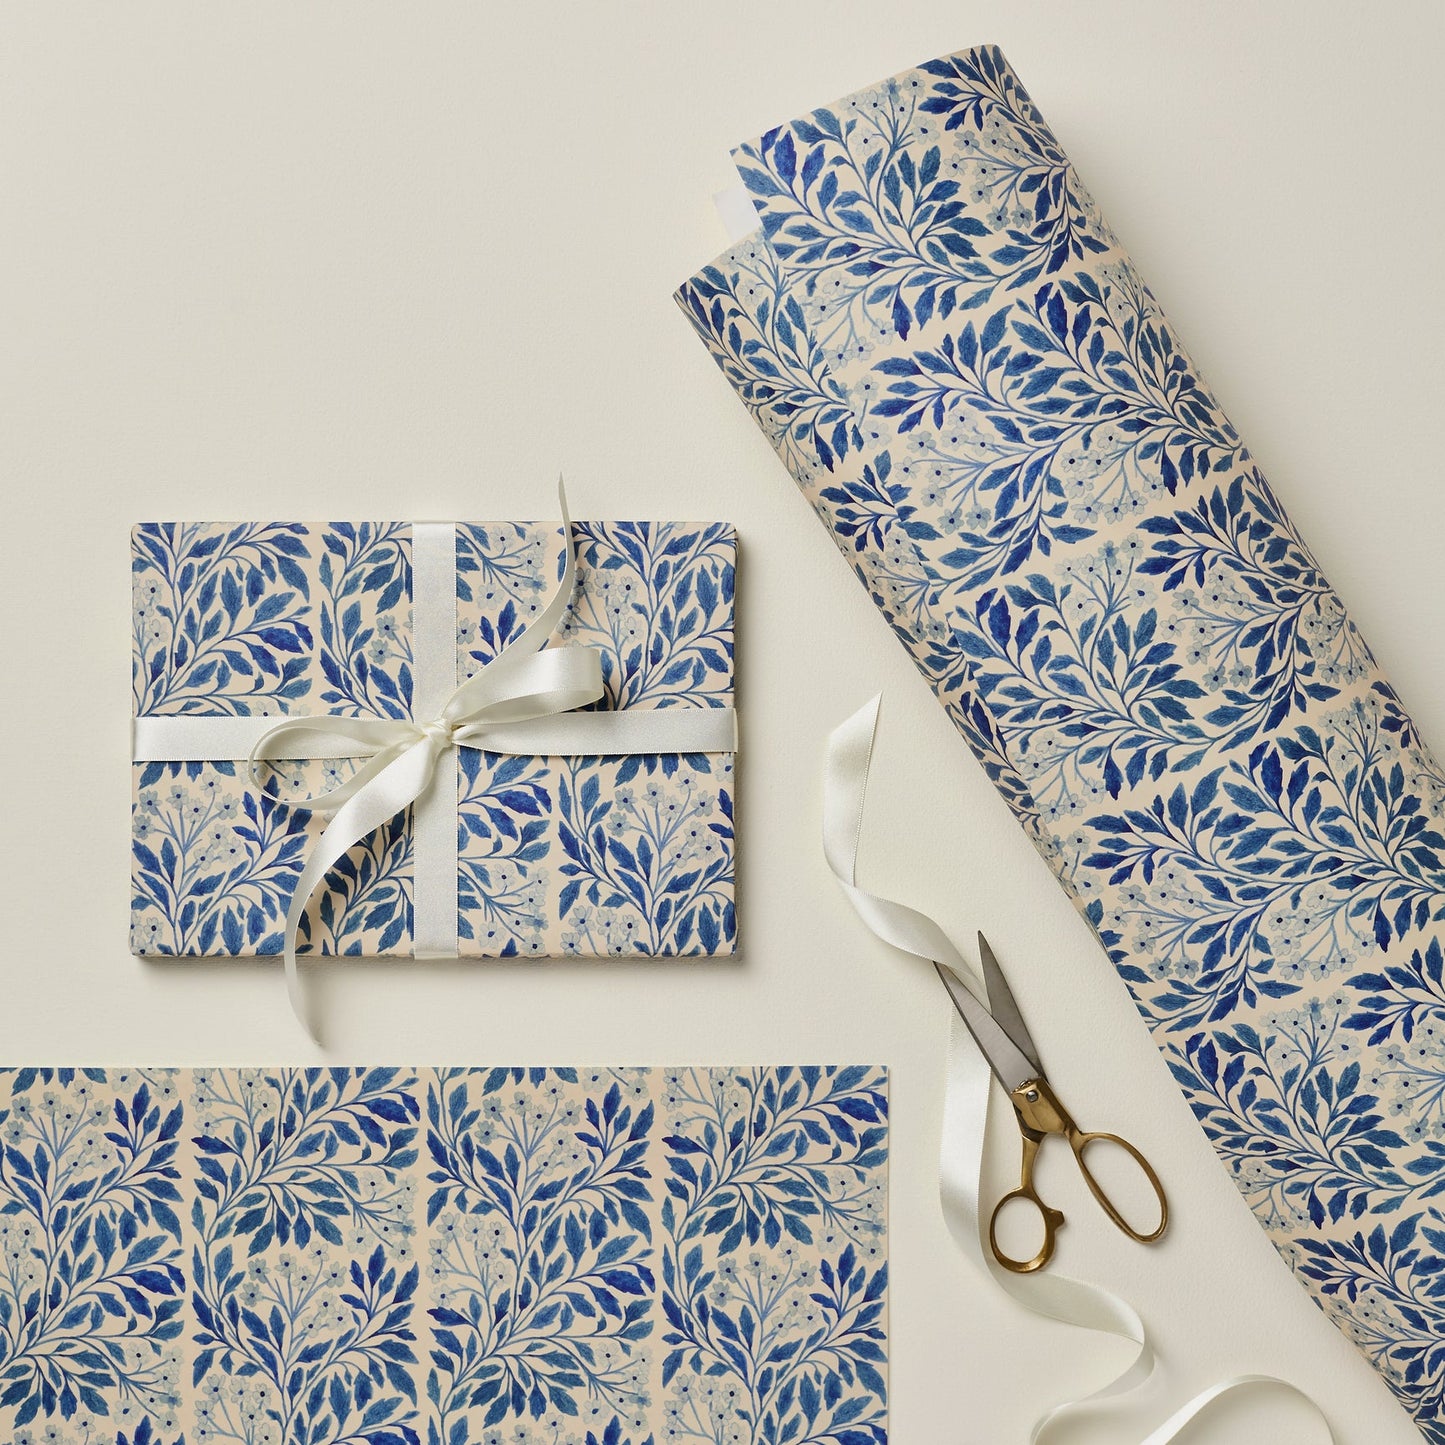 Gift Wrap - Blue Flora Patterned - The Bristol Artisan Handmade Sustainable Gifts and Homewares.